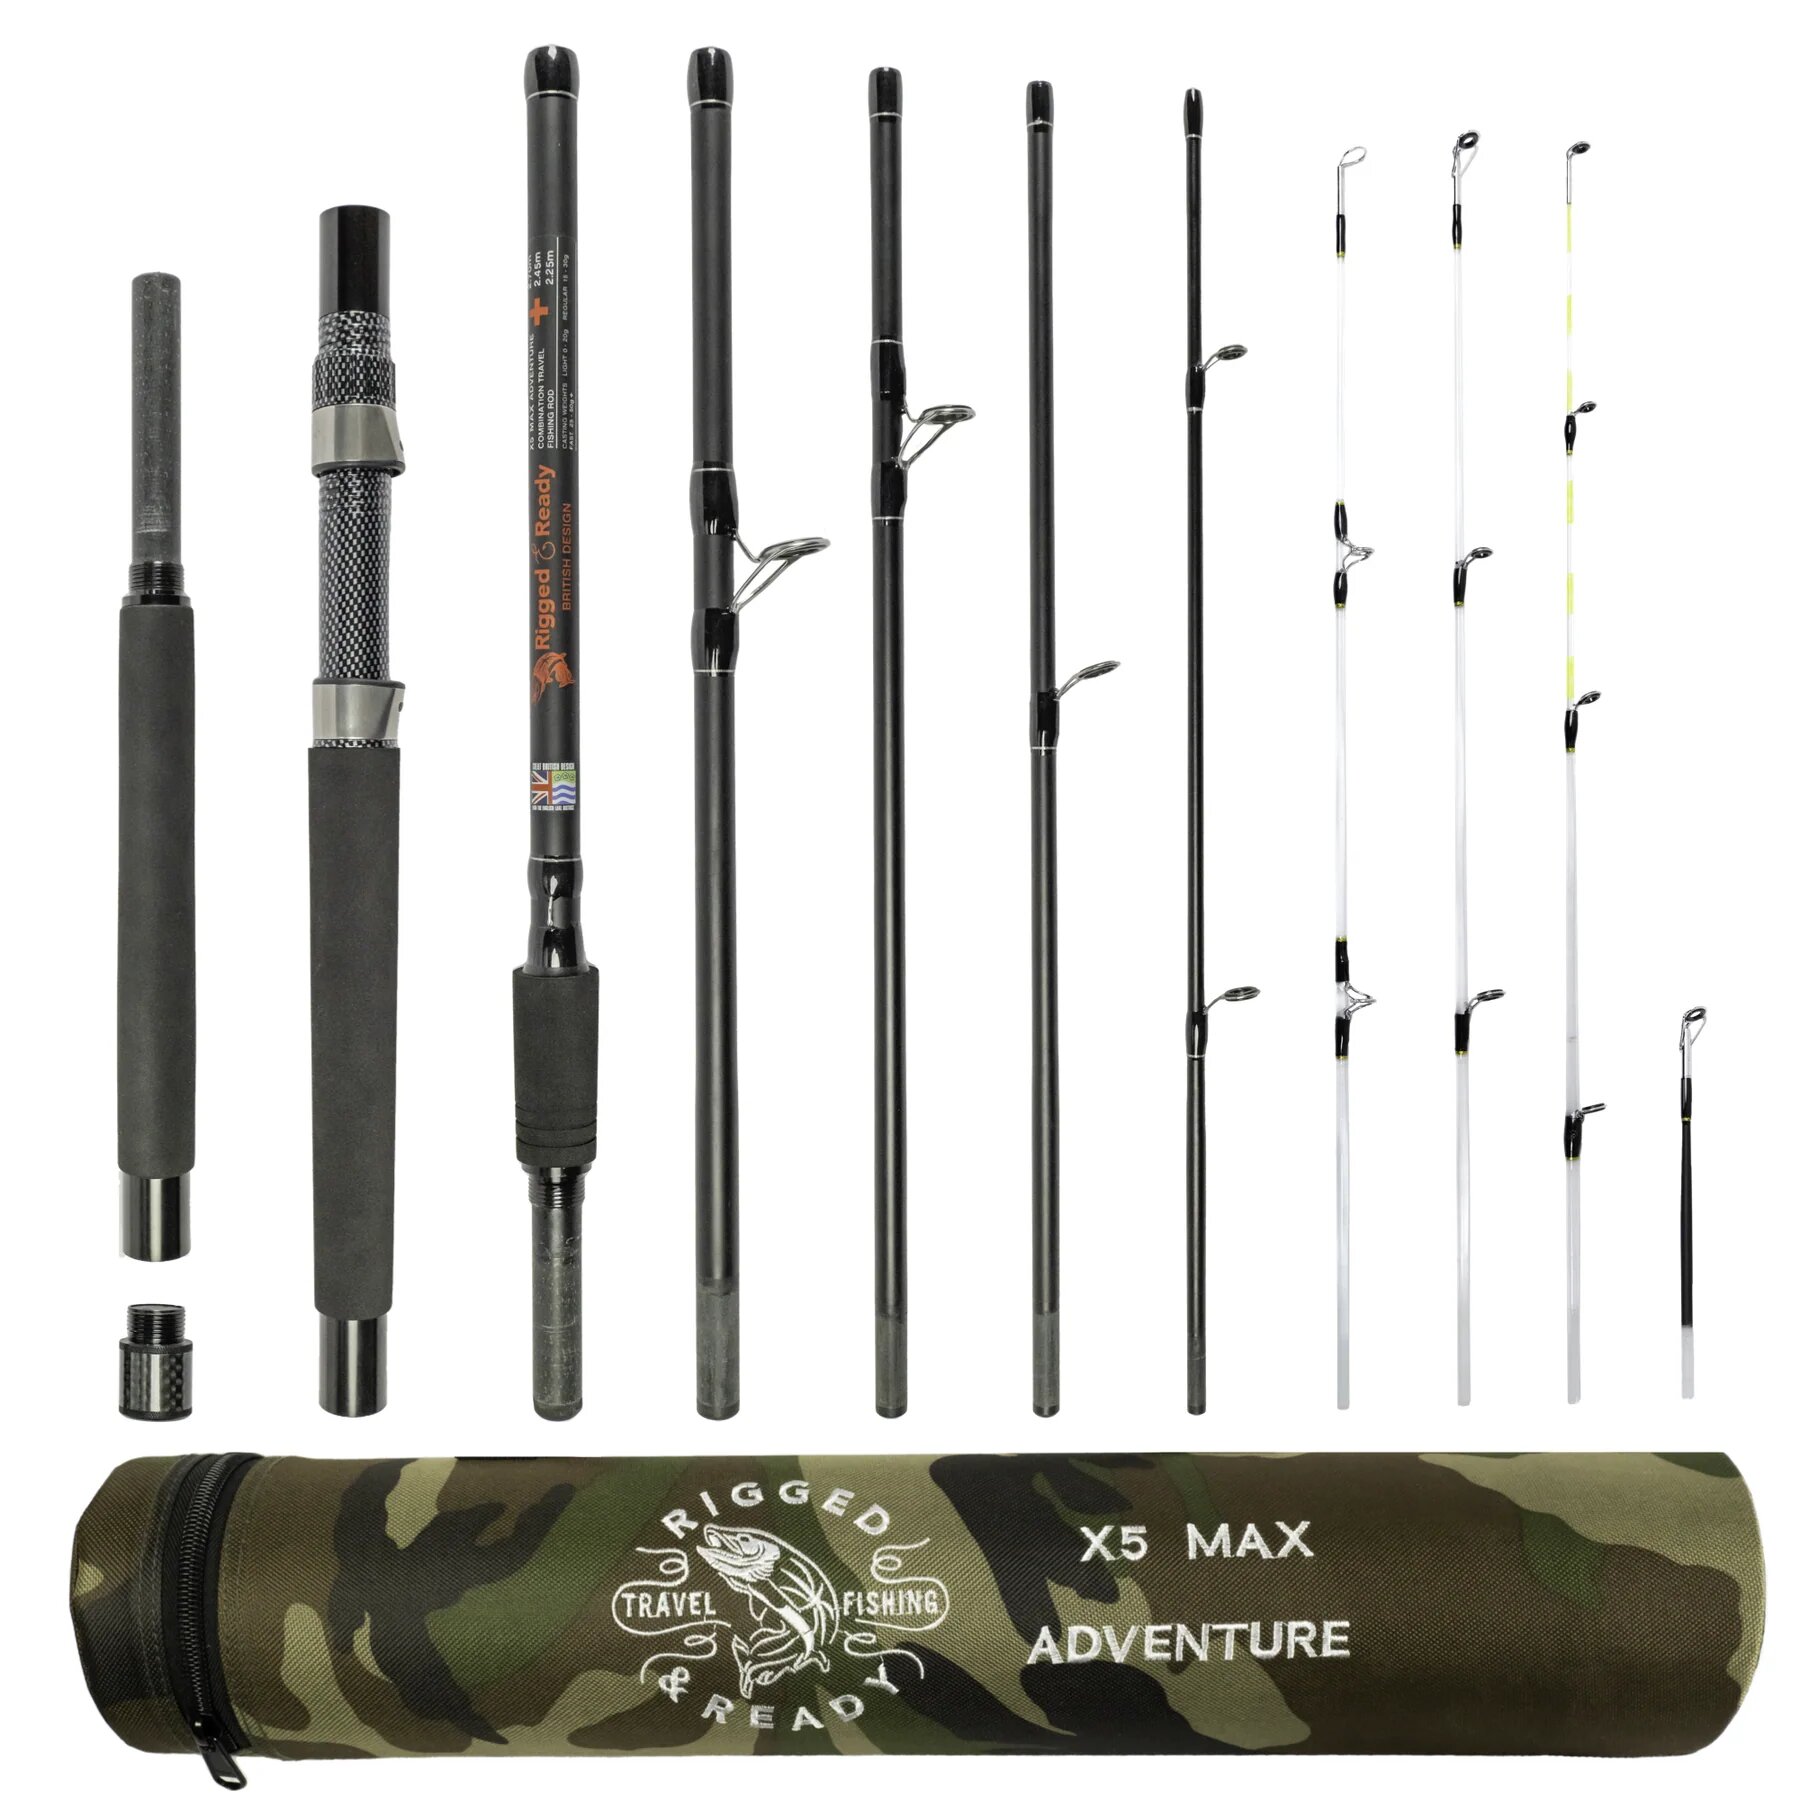 Key Factors to Consider When Buying Travel Fishing Rods